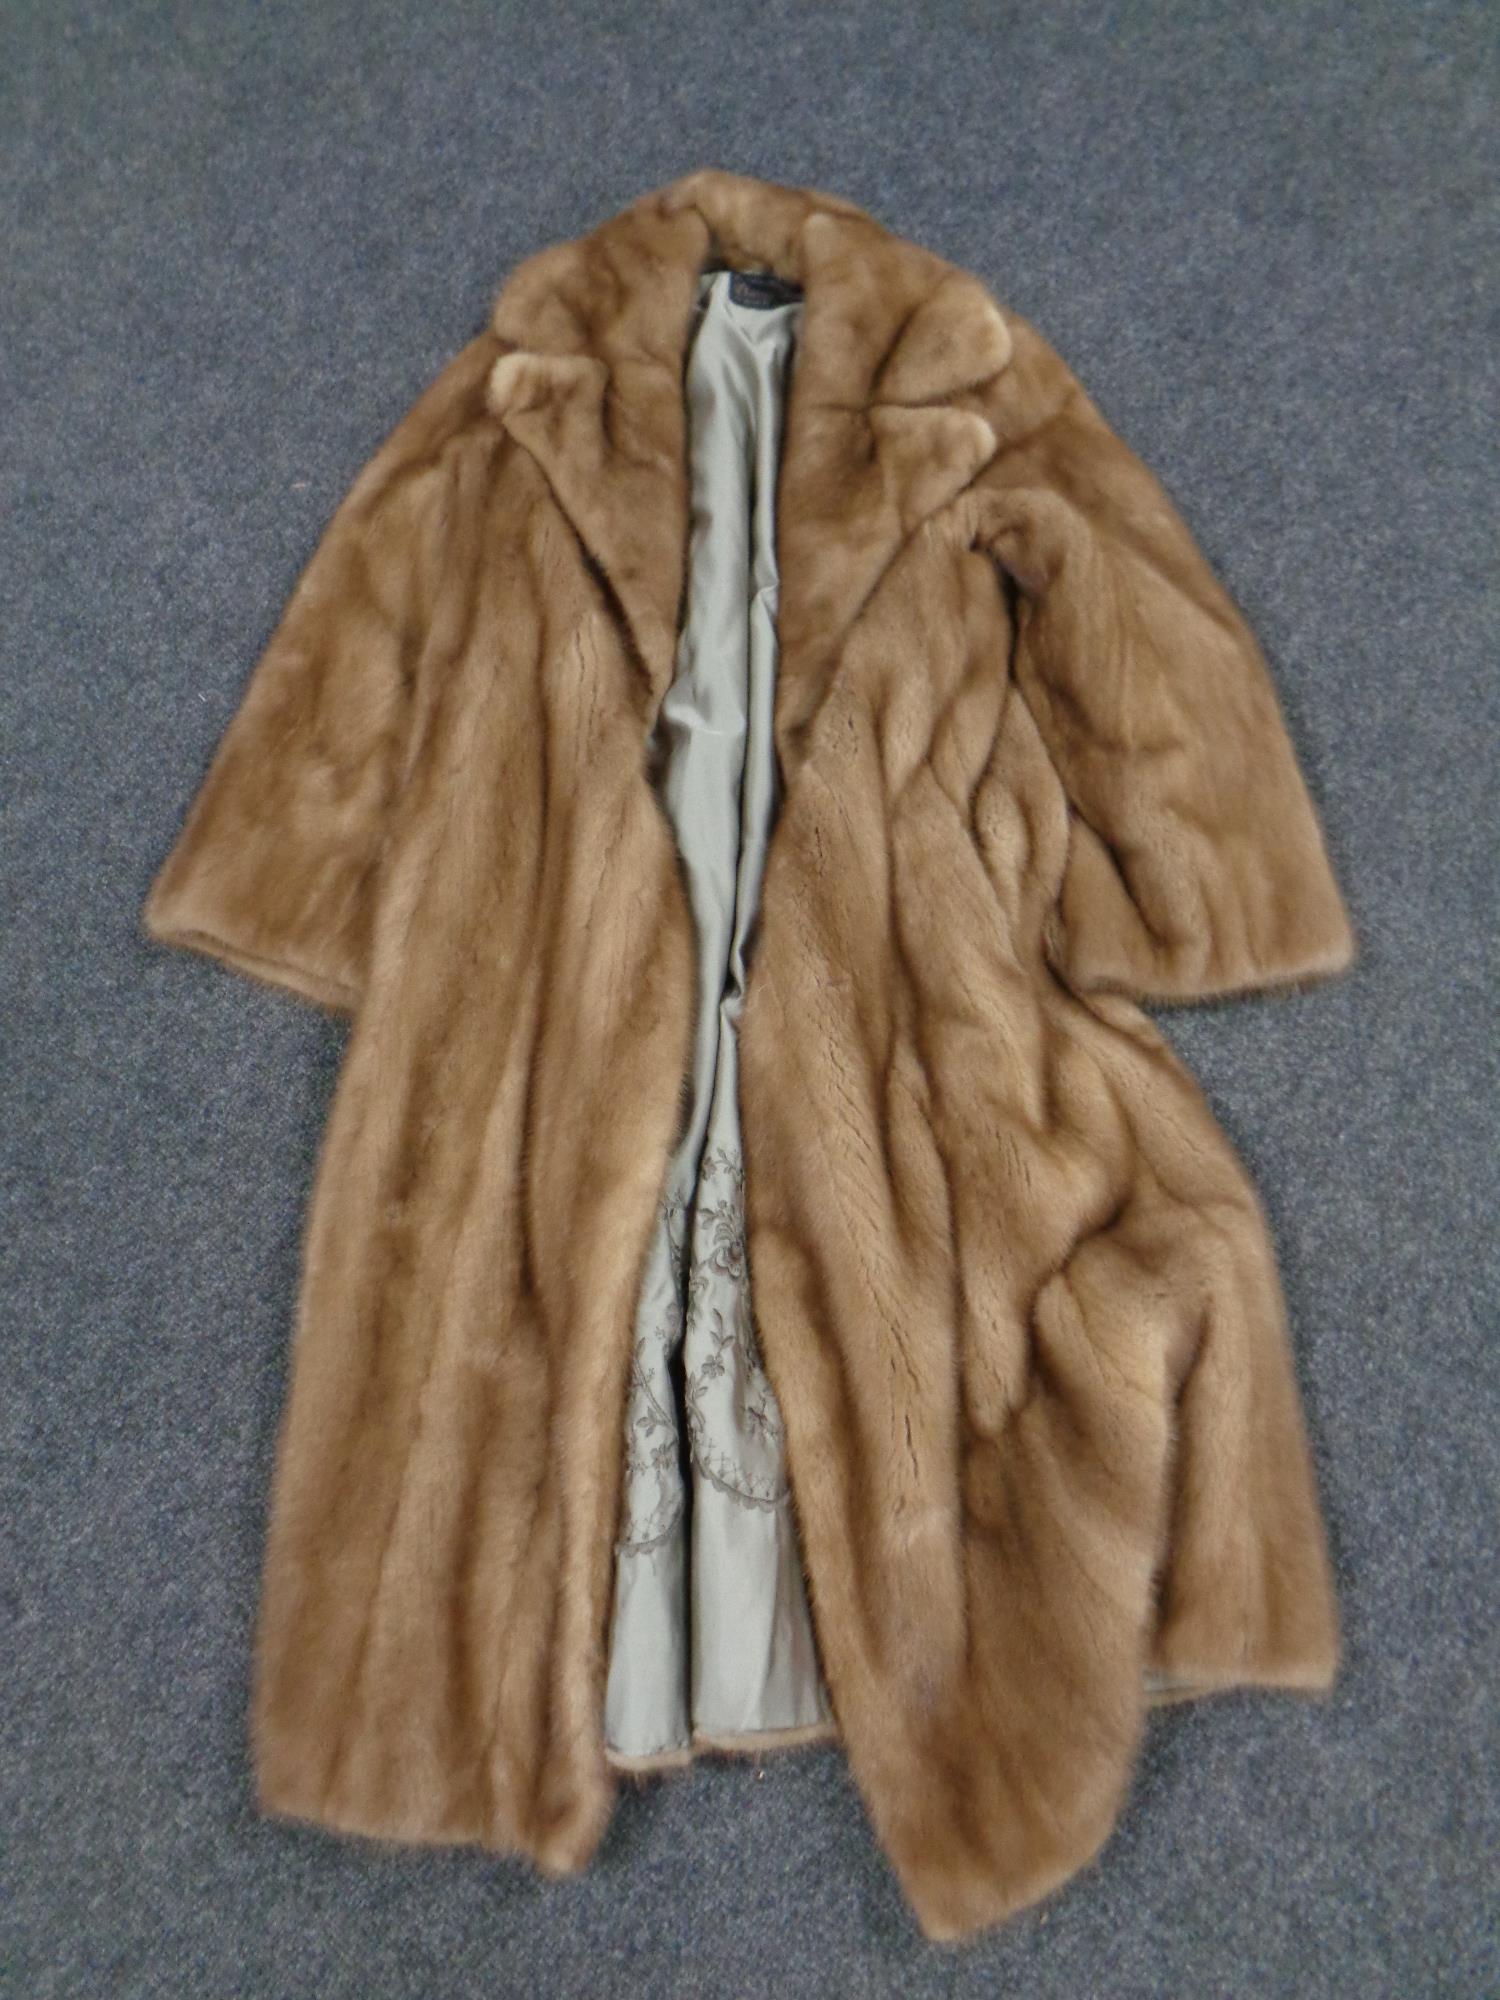 A three quarter length mink coat by Baray furs of Liverpool